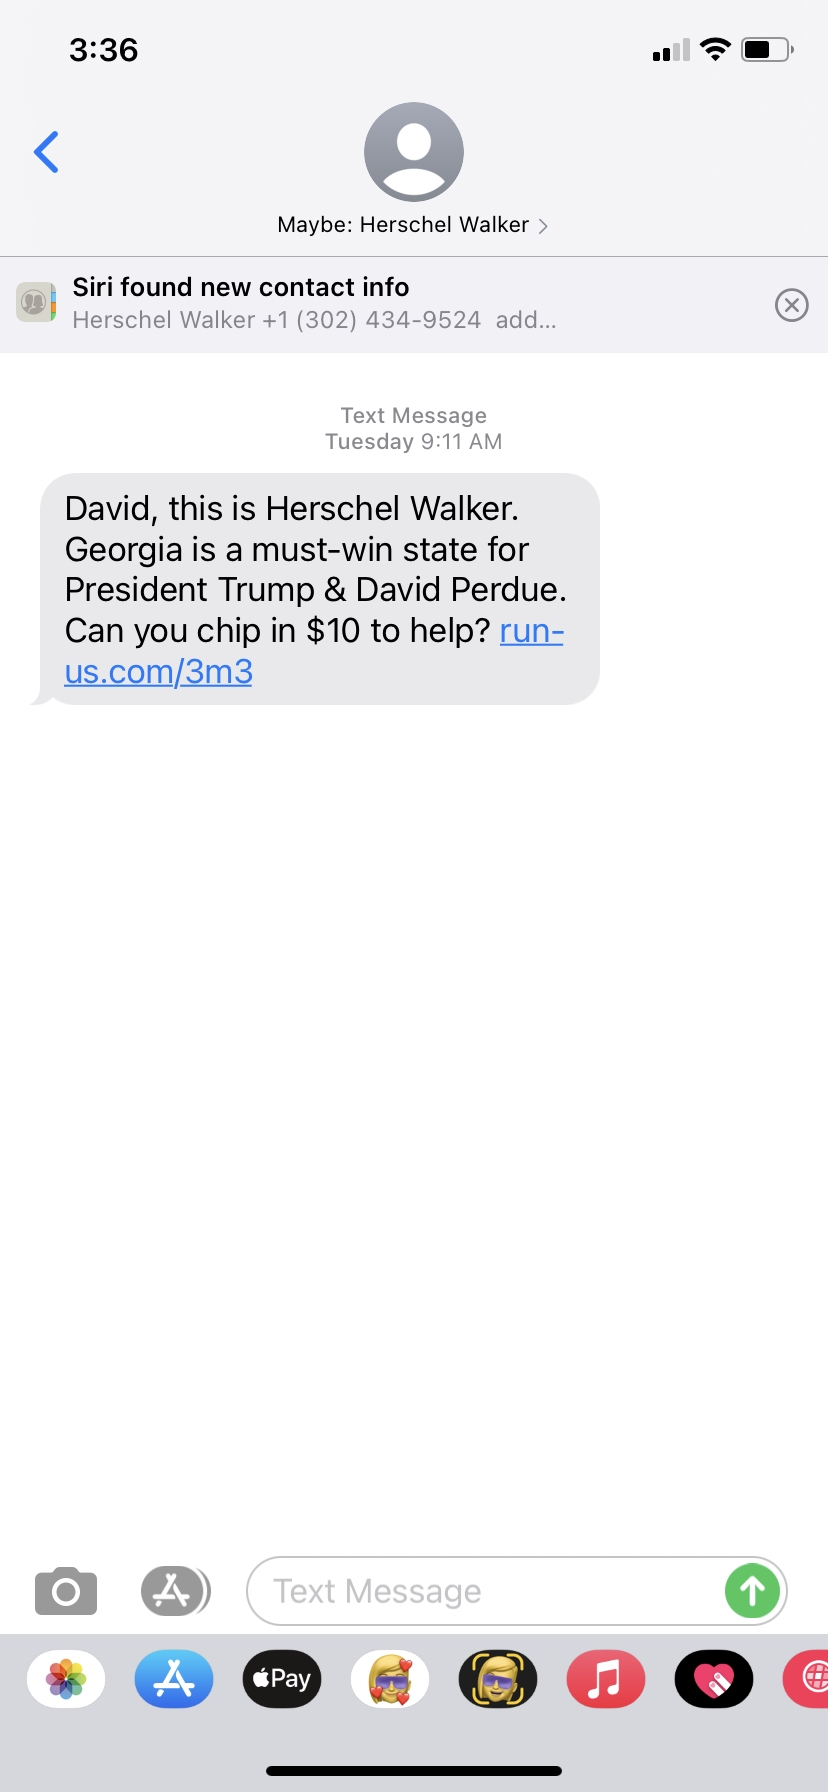 What I Learned About Digital Short-form Content From 2,462 Republican Recruitment Text Messages